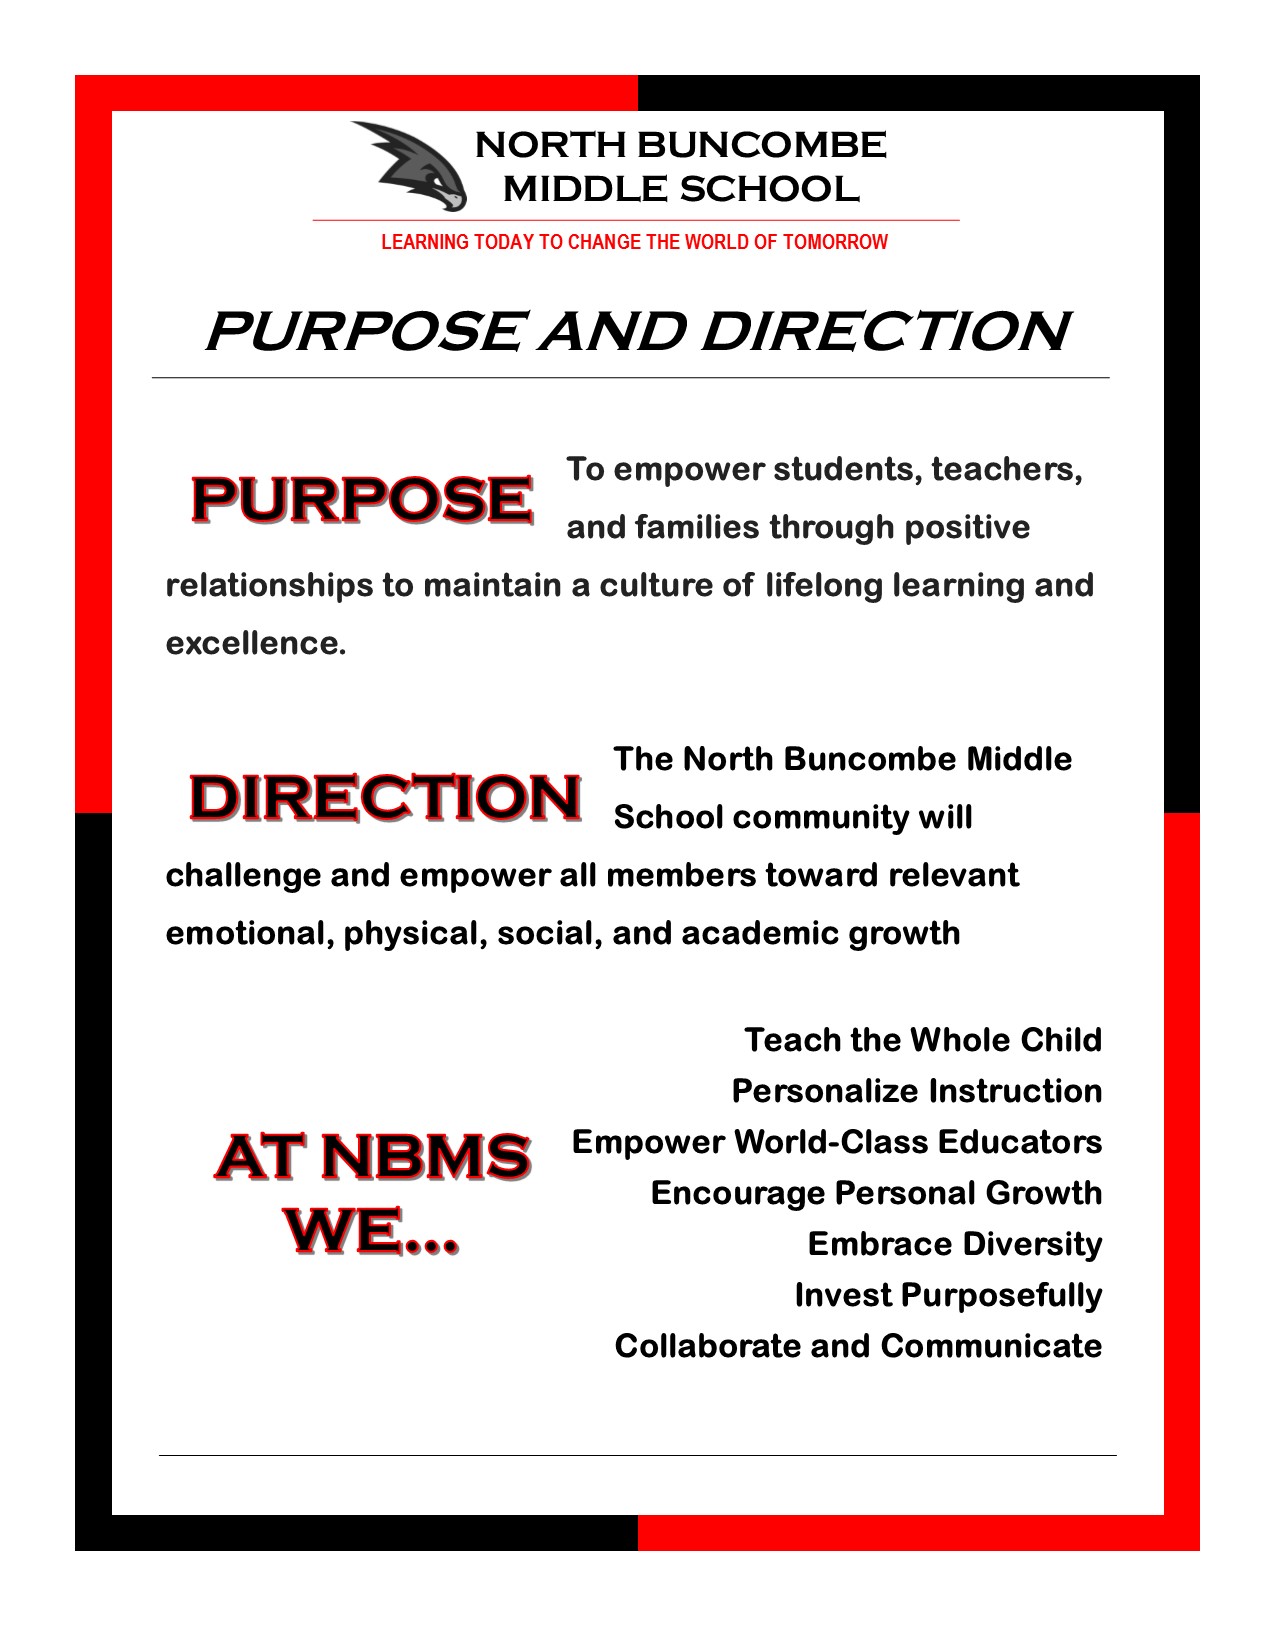 North Buncombe MS Purpose and Direction Statement